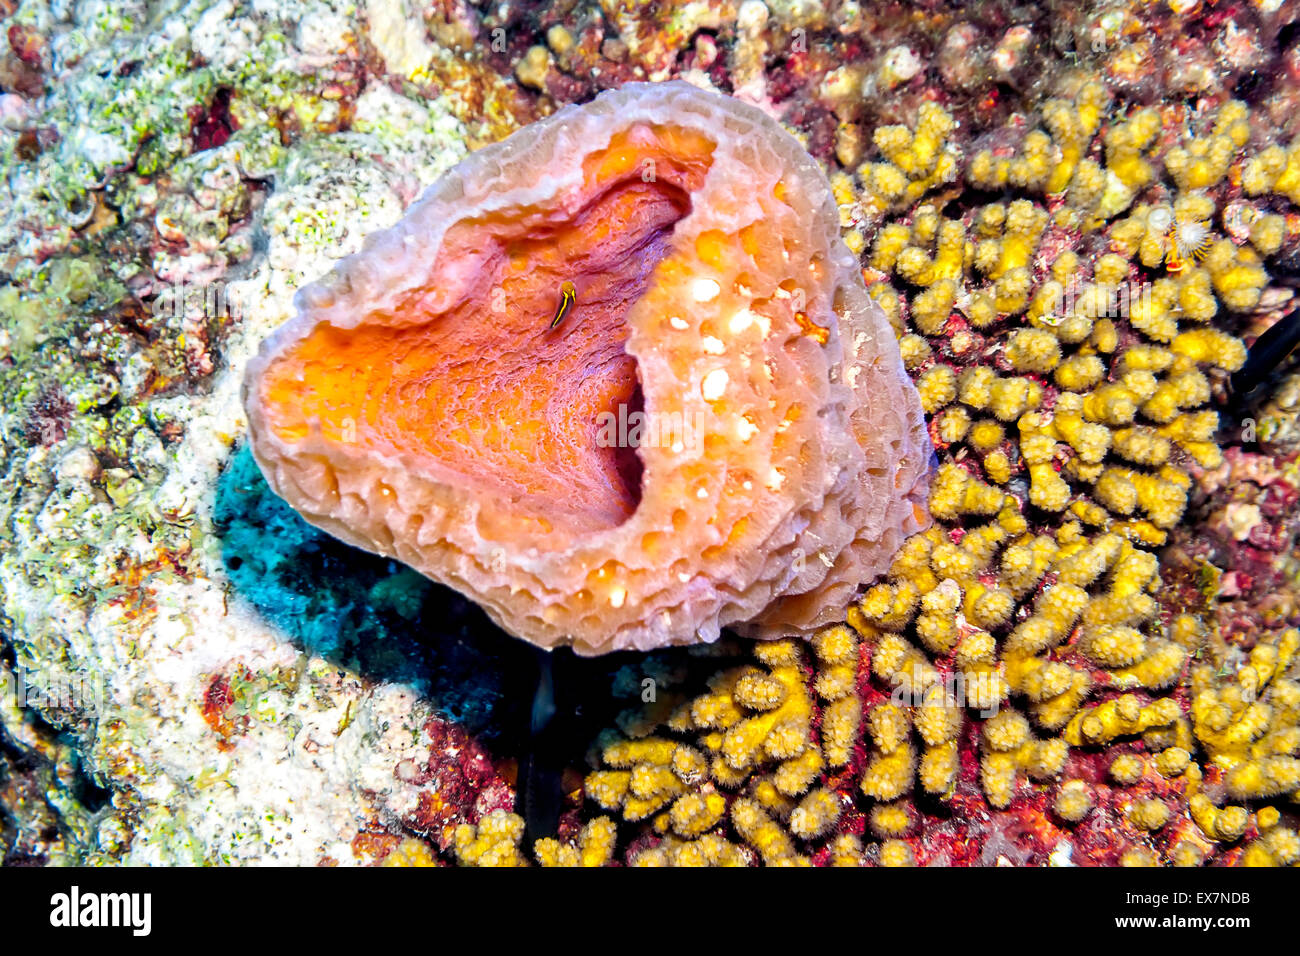 Pink Vase Sponge and Colin's Cleaning Goby at the Sara's Smile site in Bonaire Stock Photo